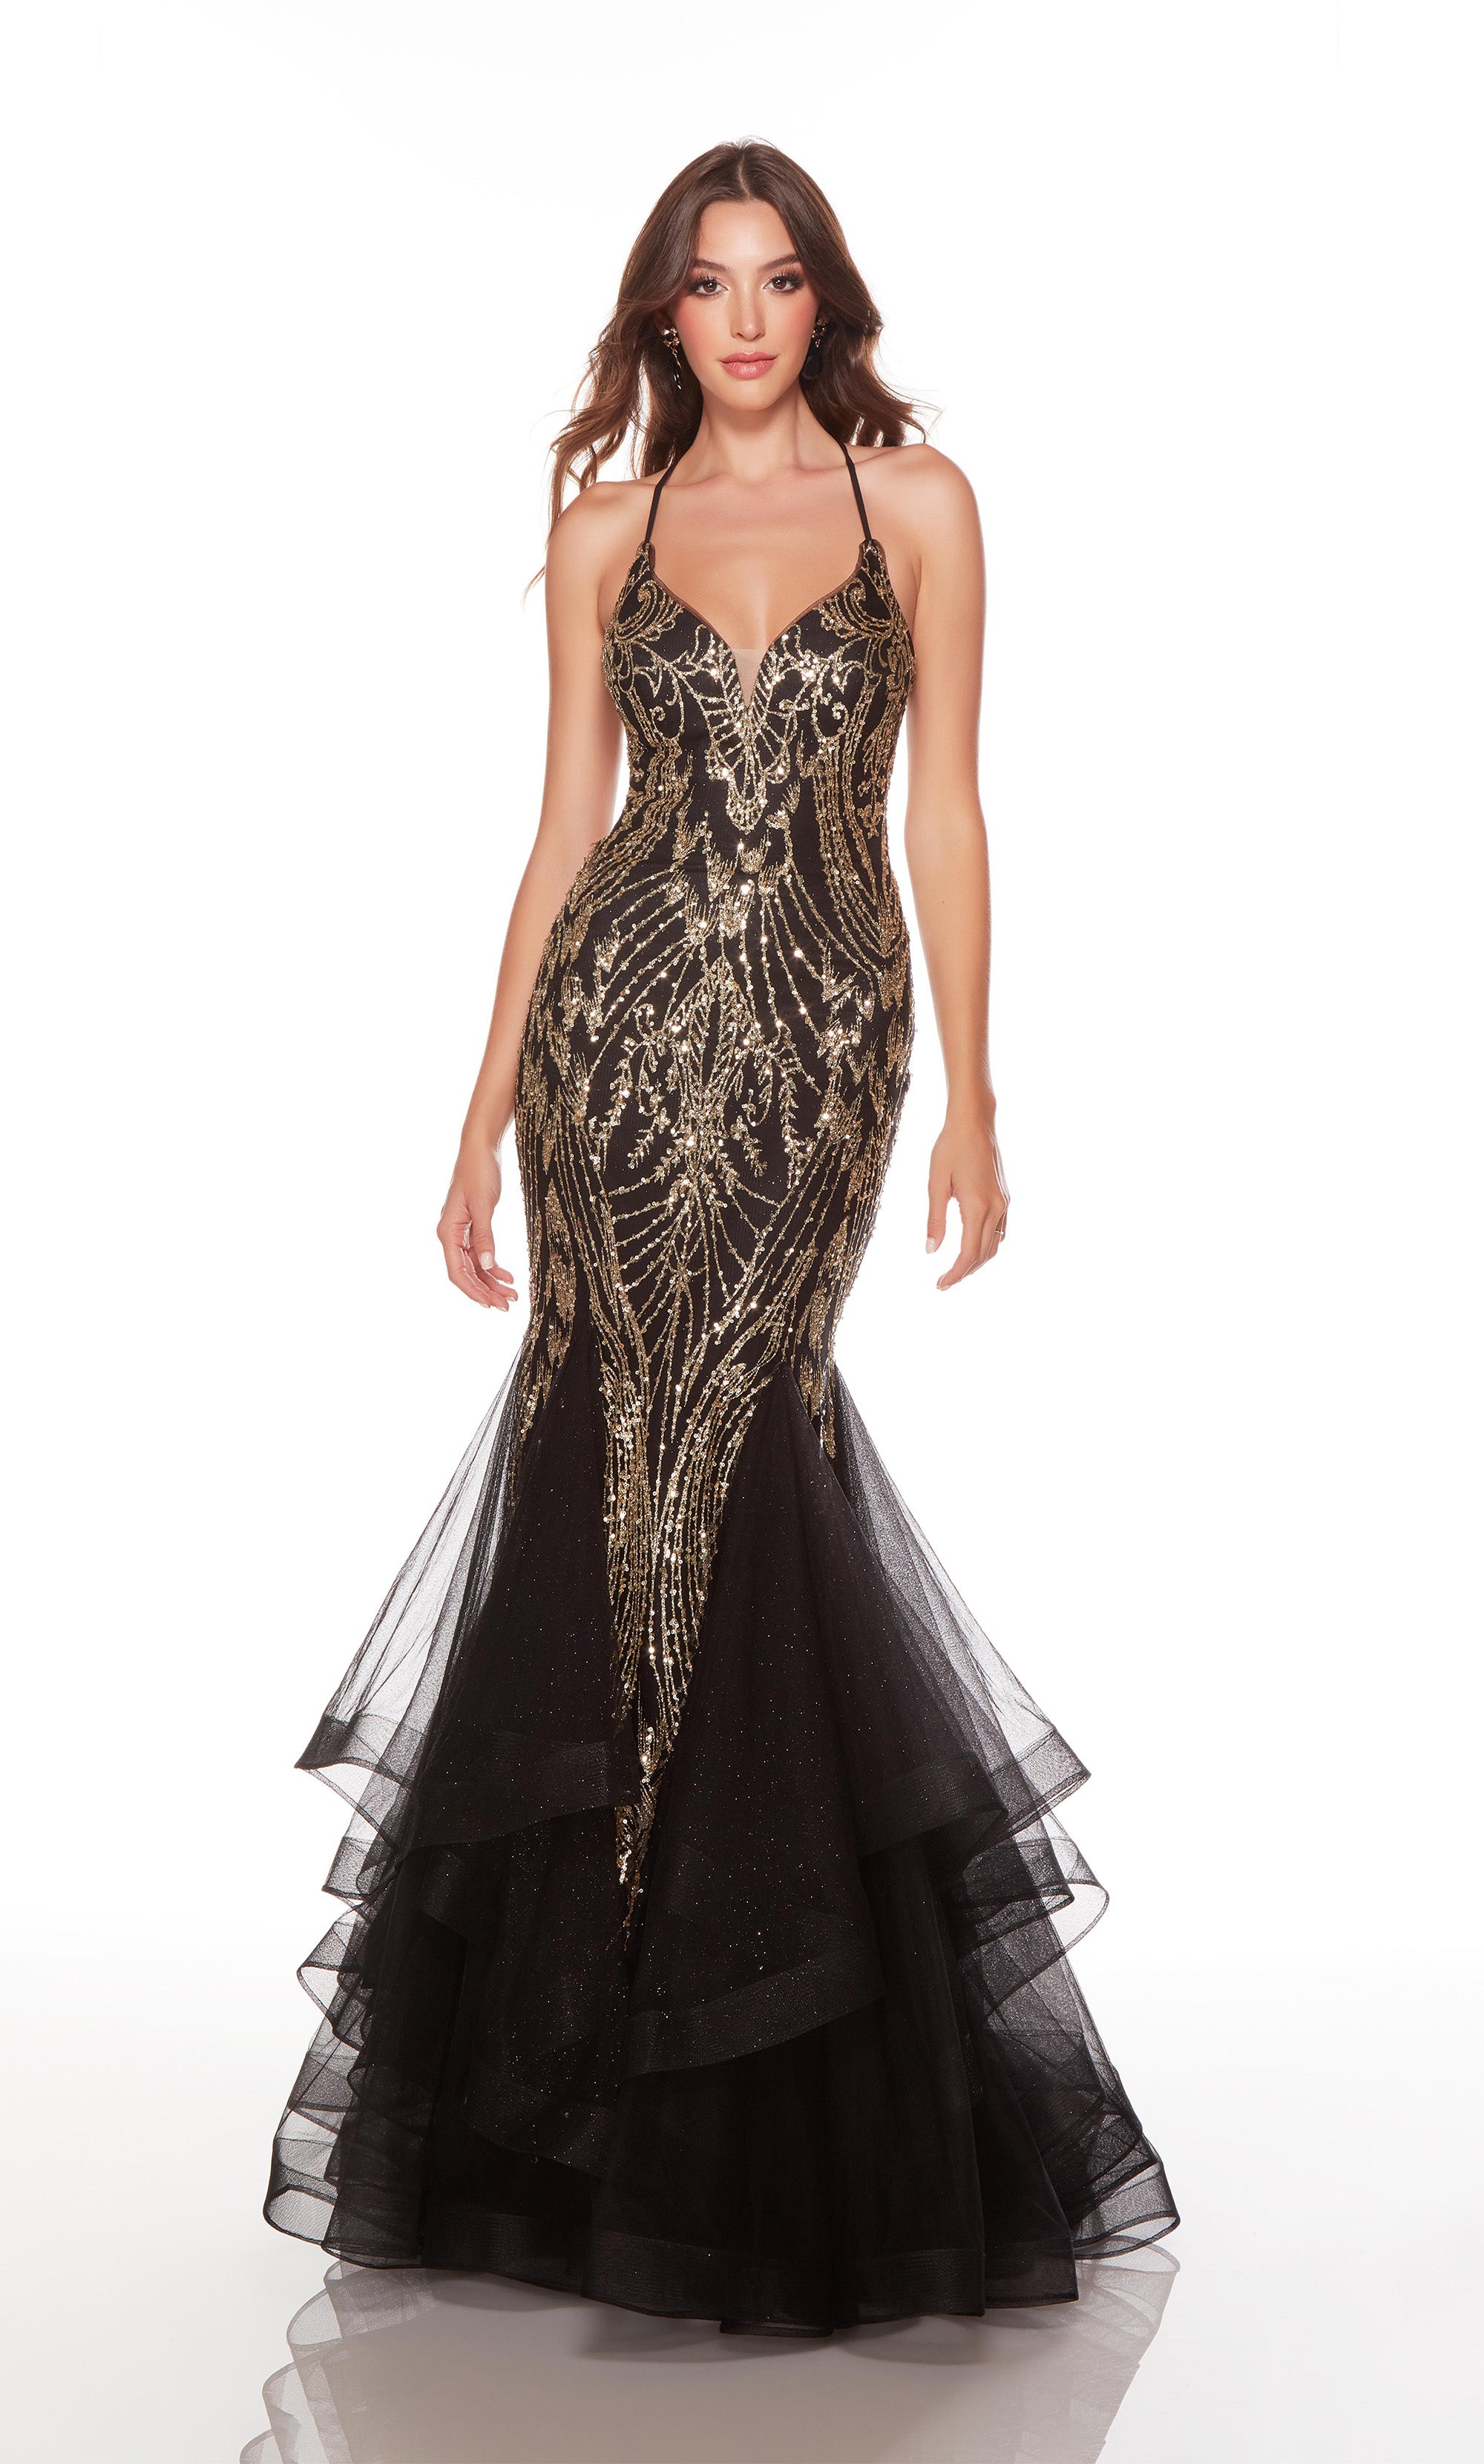 Sparkly mermaid prom dress with a plunging neckline in black-gold. COLOR-SWATCH_61415__BLACK-GOLD